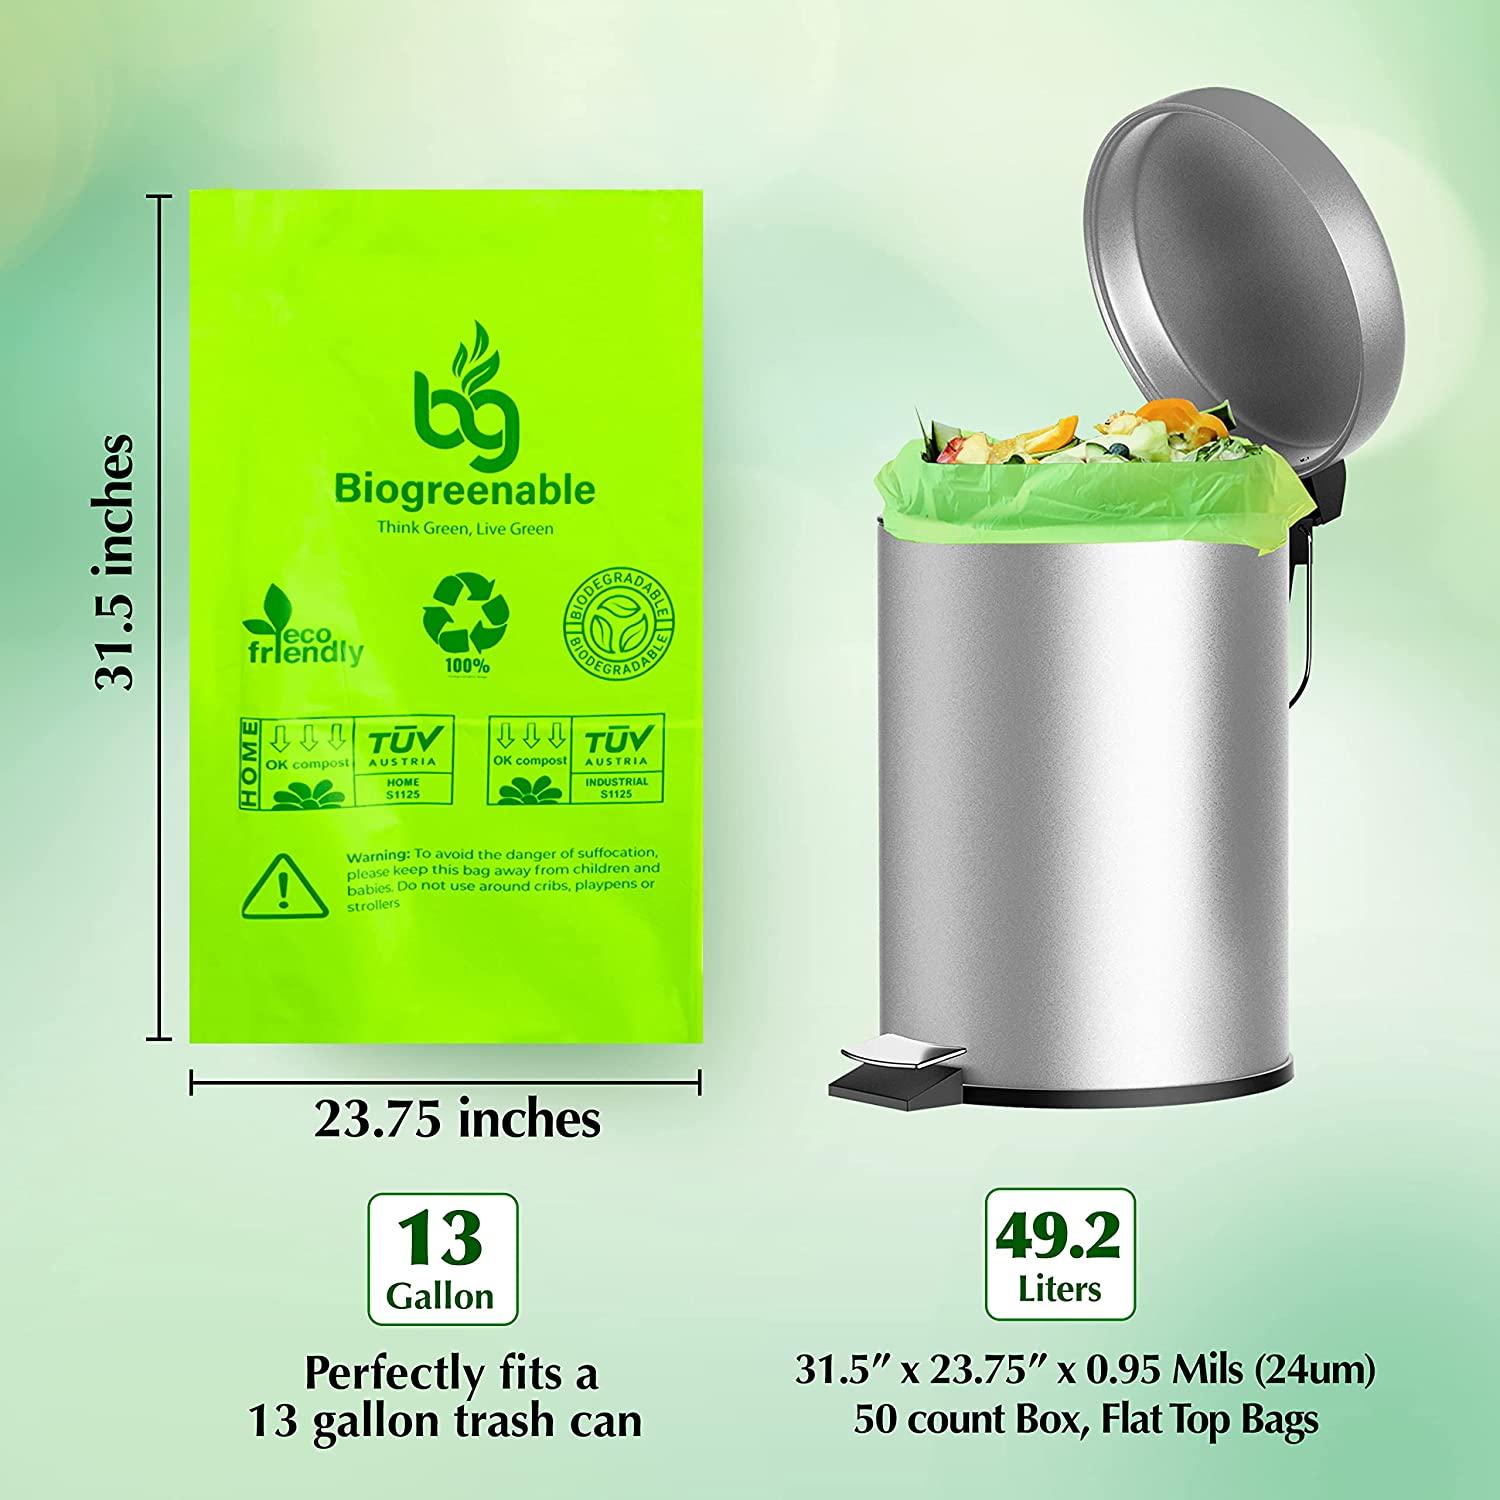 Biogreenable Compostable Trash Bags 13 Gallon, 0.95 Mils - Extra Thick  Biodegradable Trash Bags 13 Gallon Tall Kitchen, Large Size 80cm x 60 cm,  50 Count, Europe OK Compost Certified, 49.2L Capacity